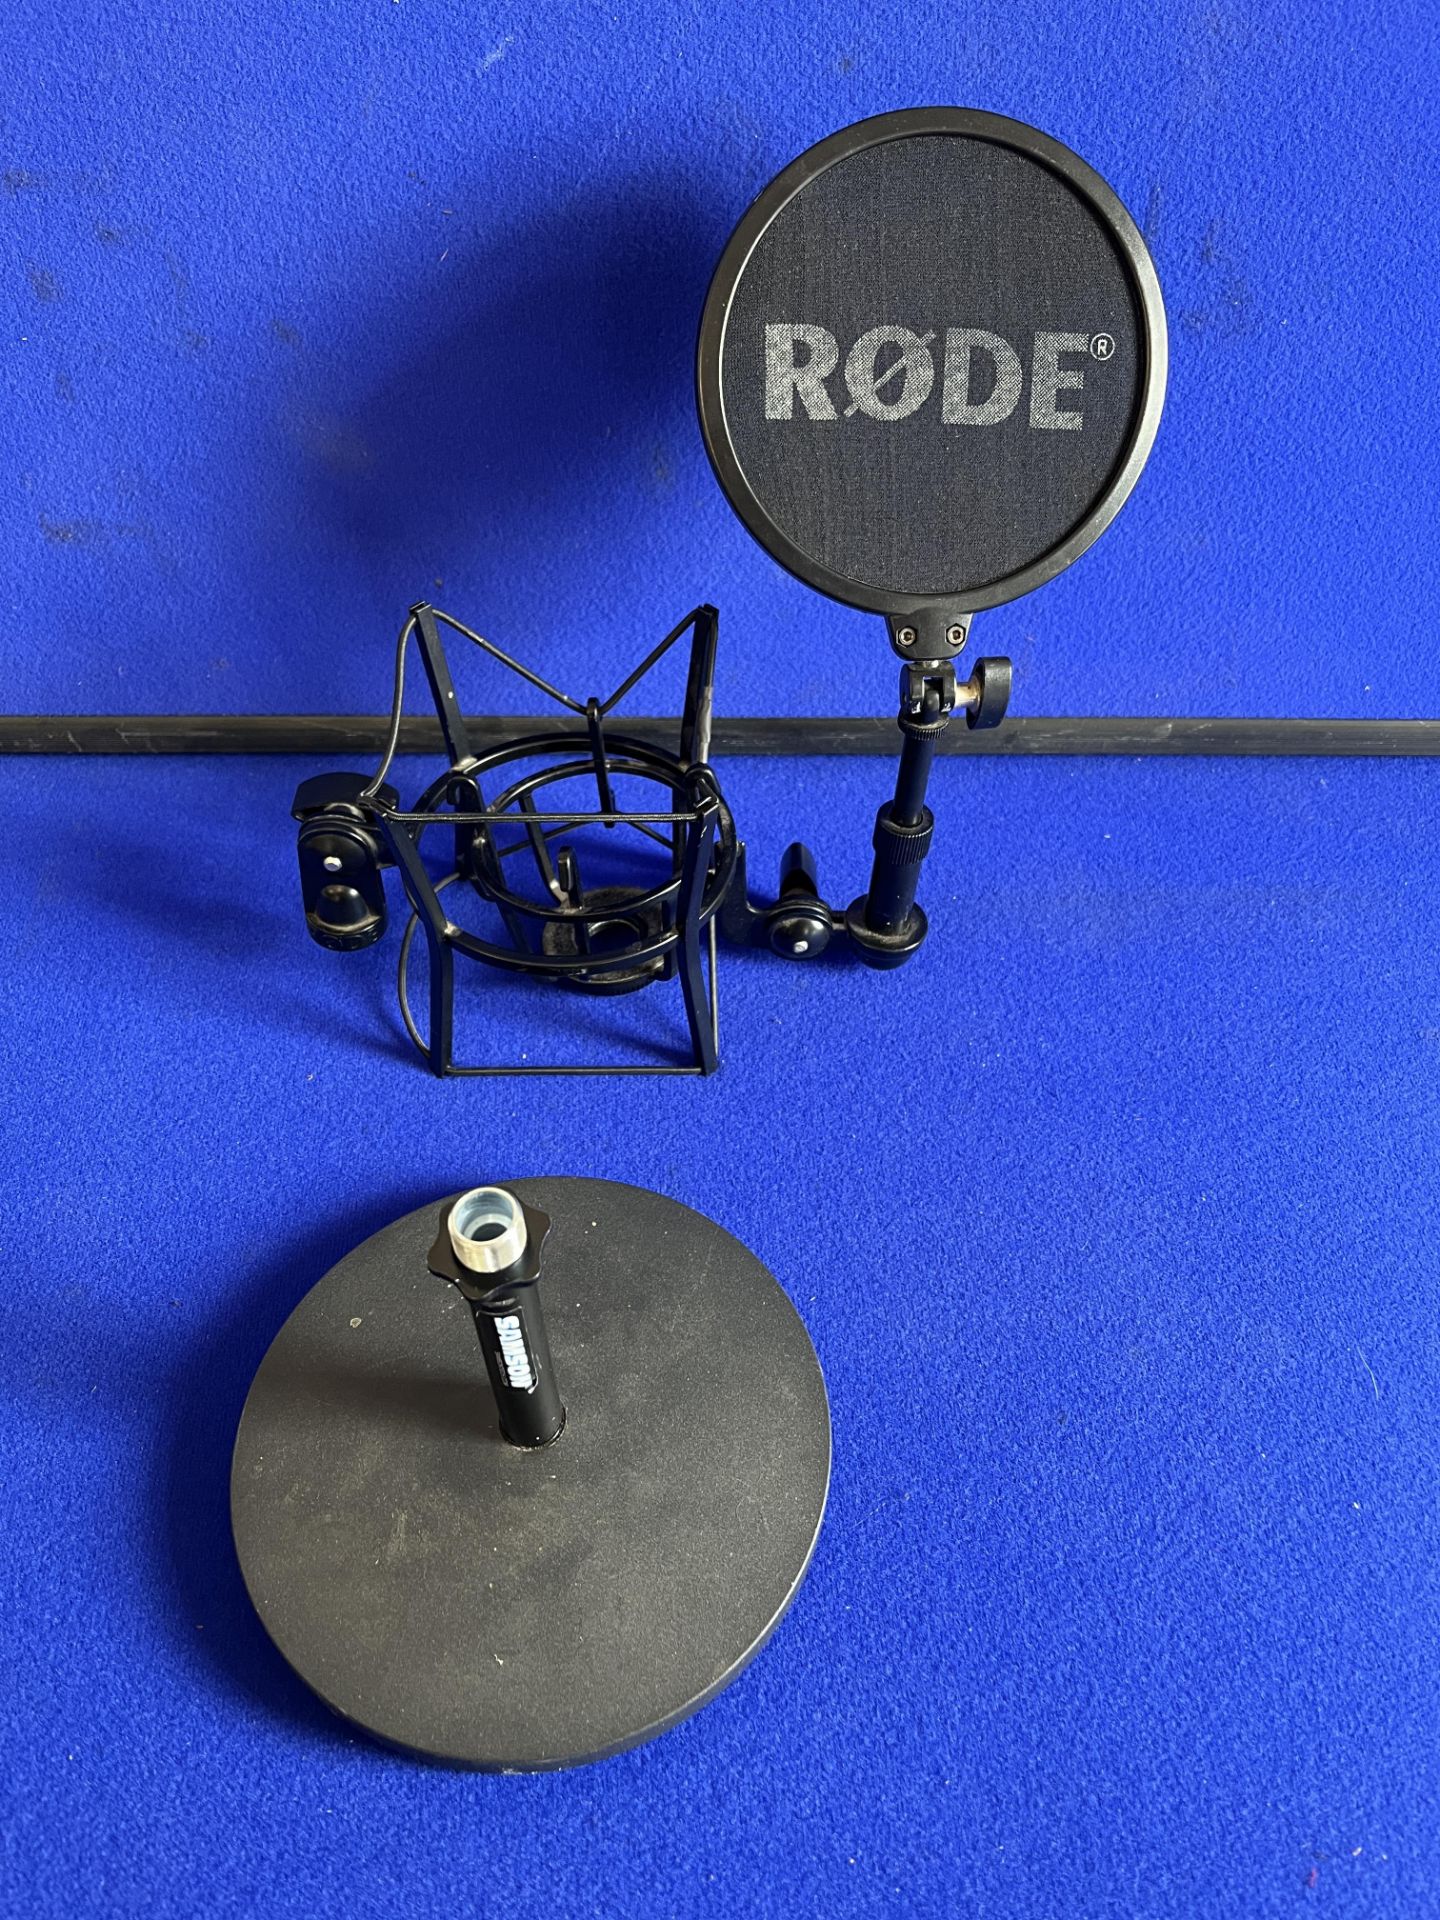 Accessories for microphones - as pictured